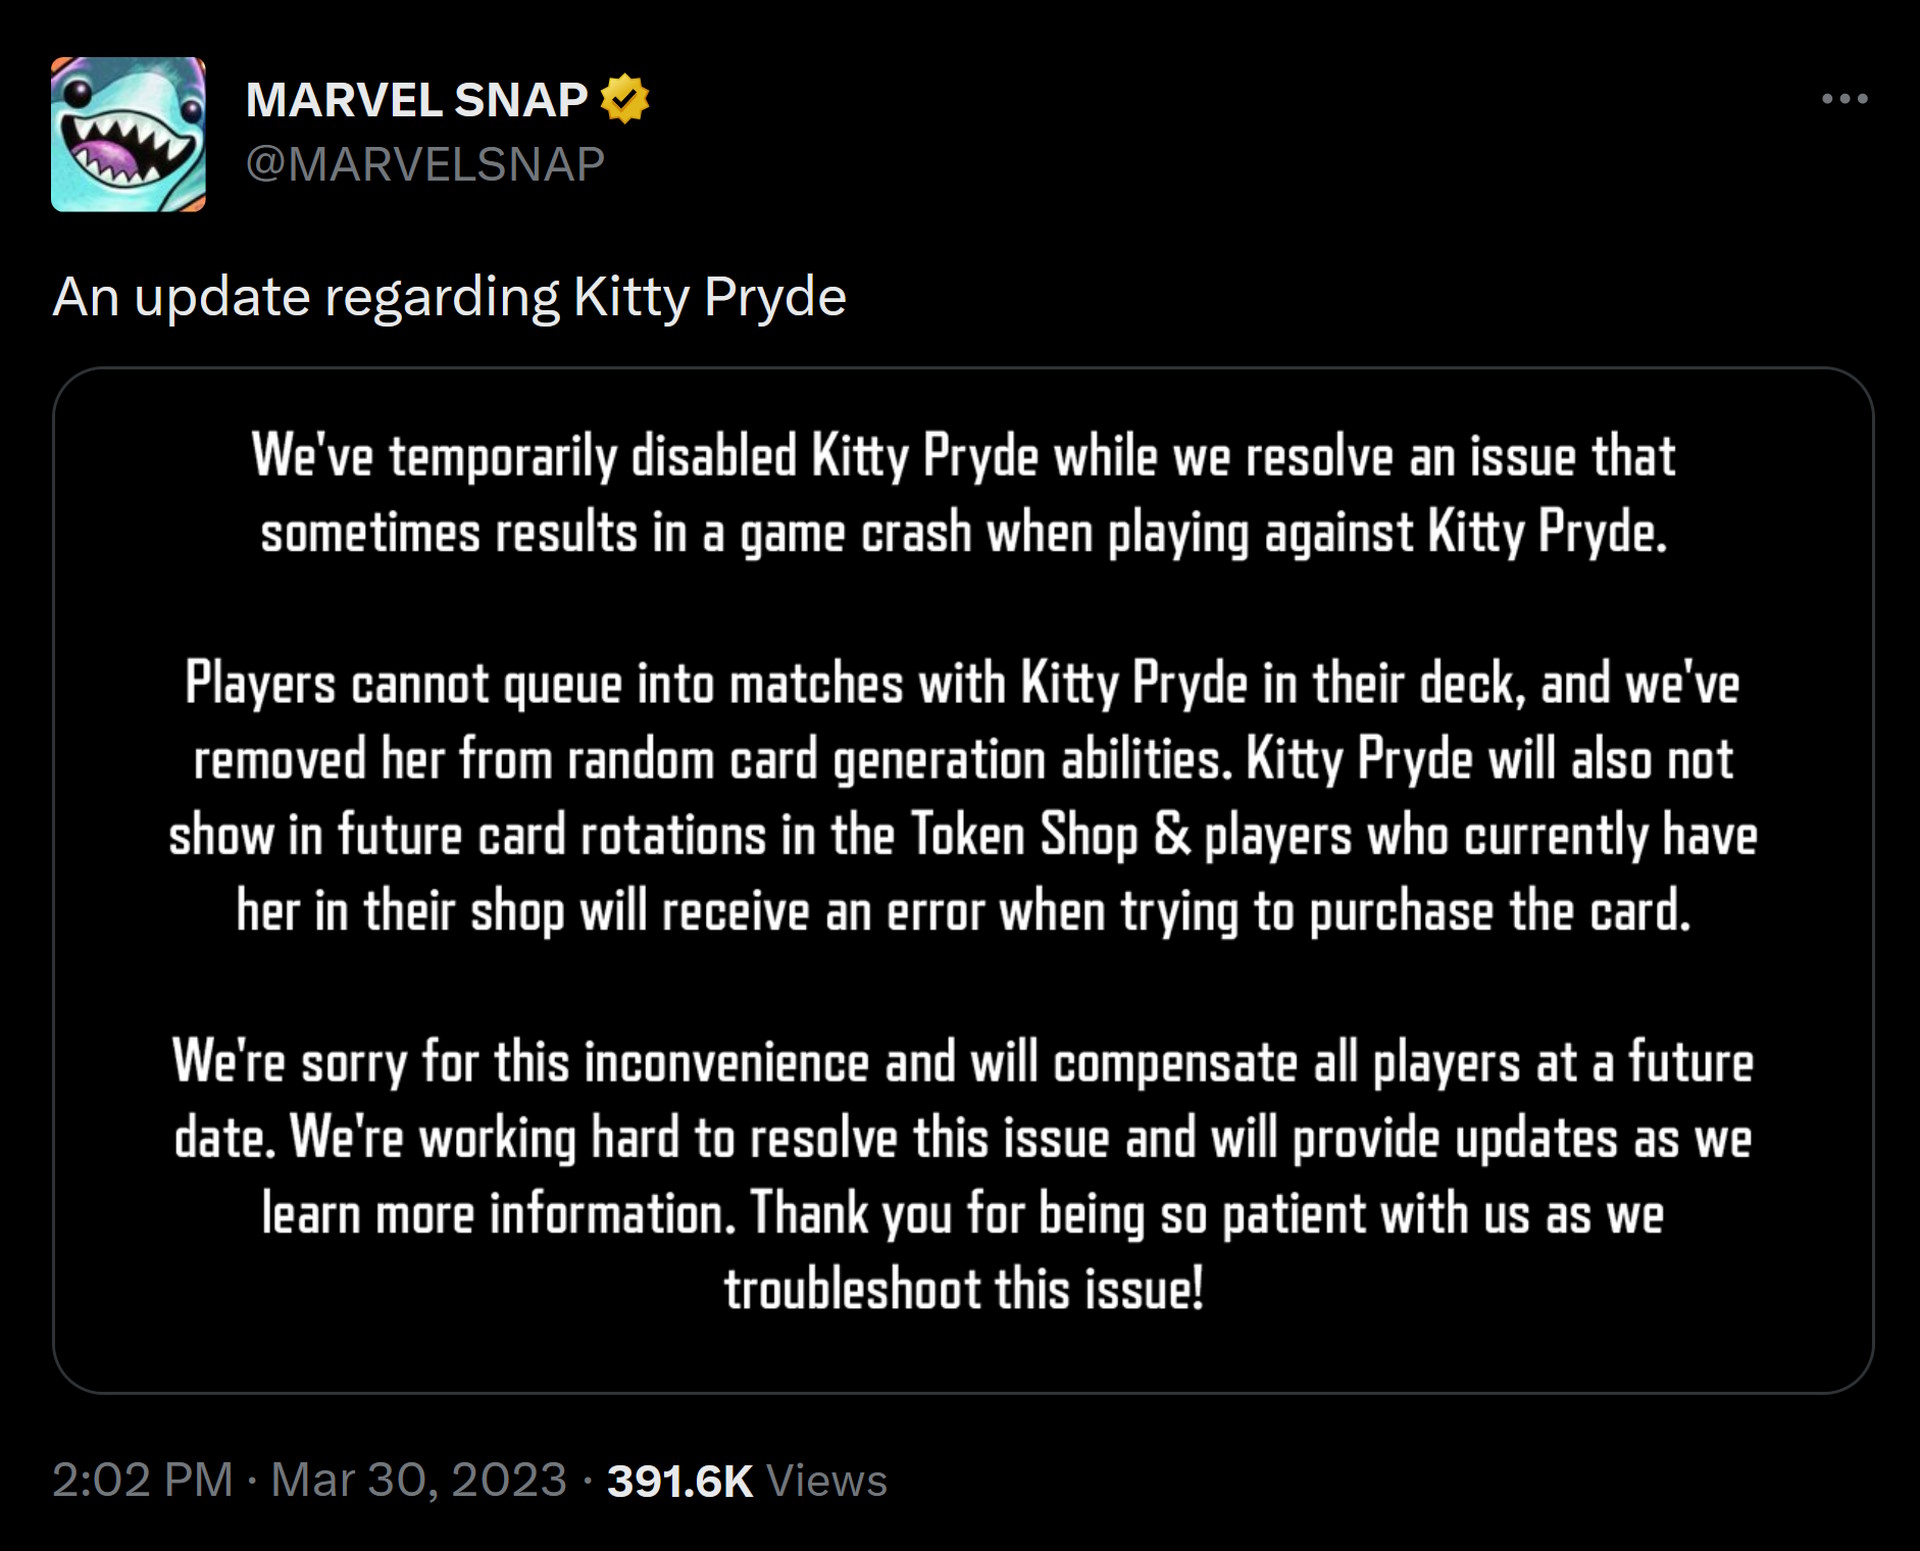 Marvel Snap - Kitty Pryde update